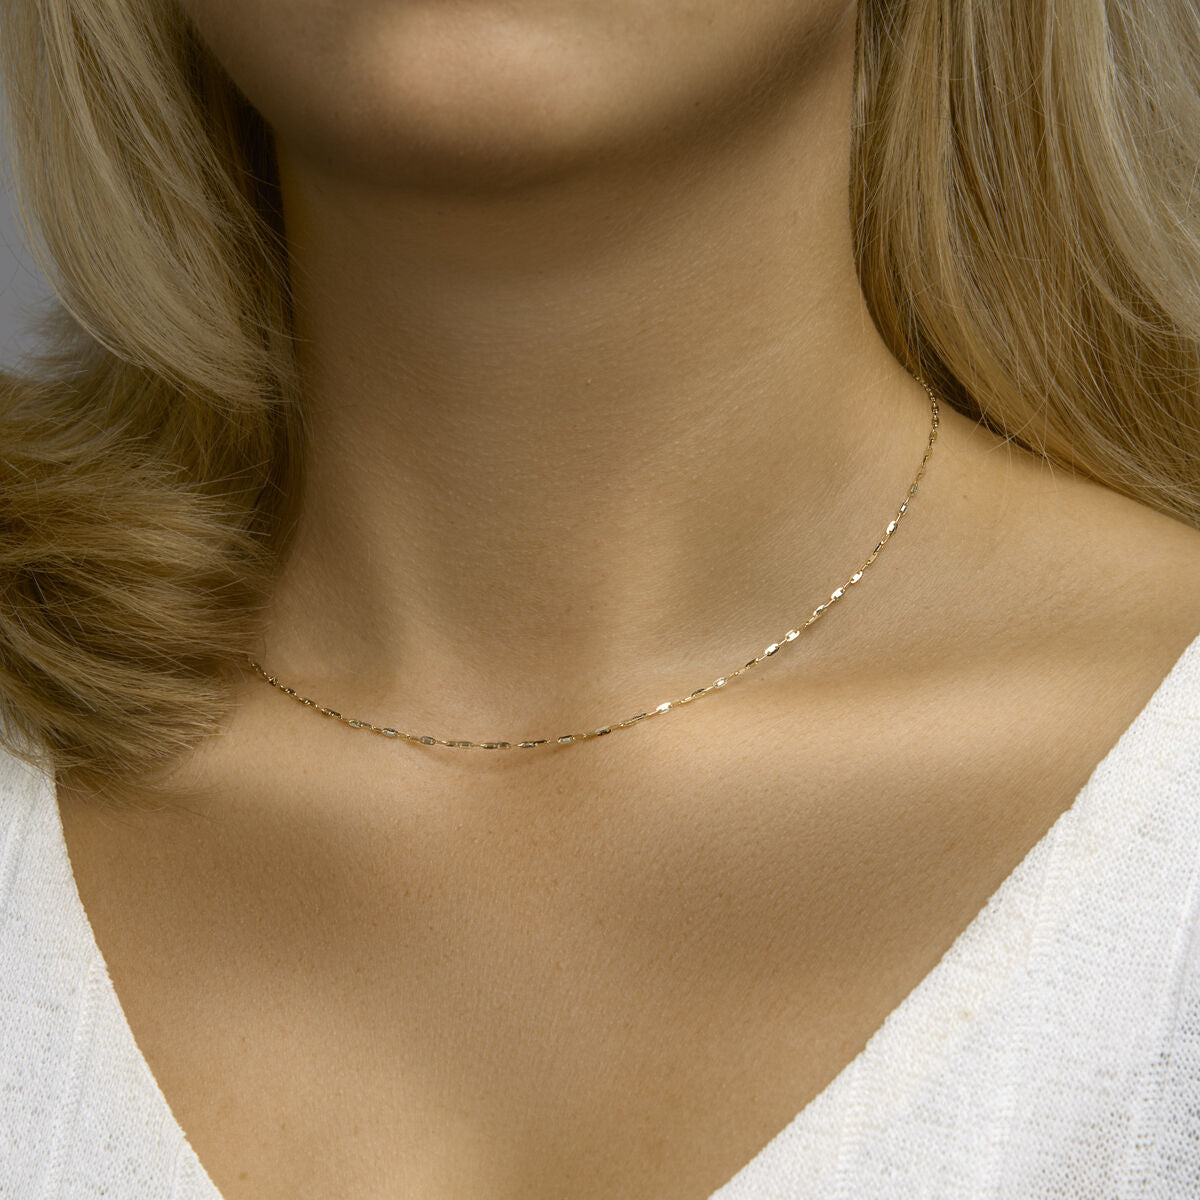 Gold by Rimenzo - Ketting plaatjes 1,5 mm 41 - 43 - 45 cm